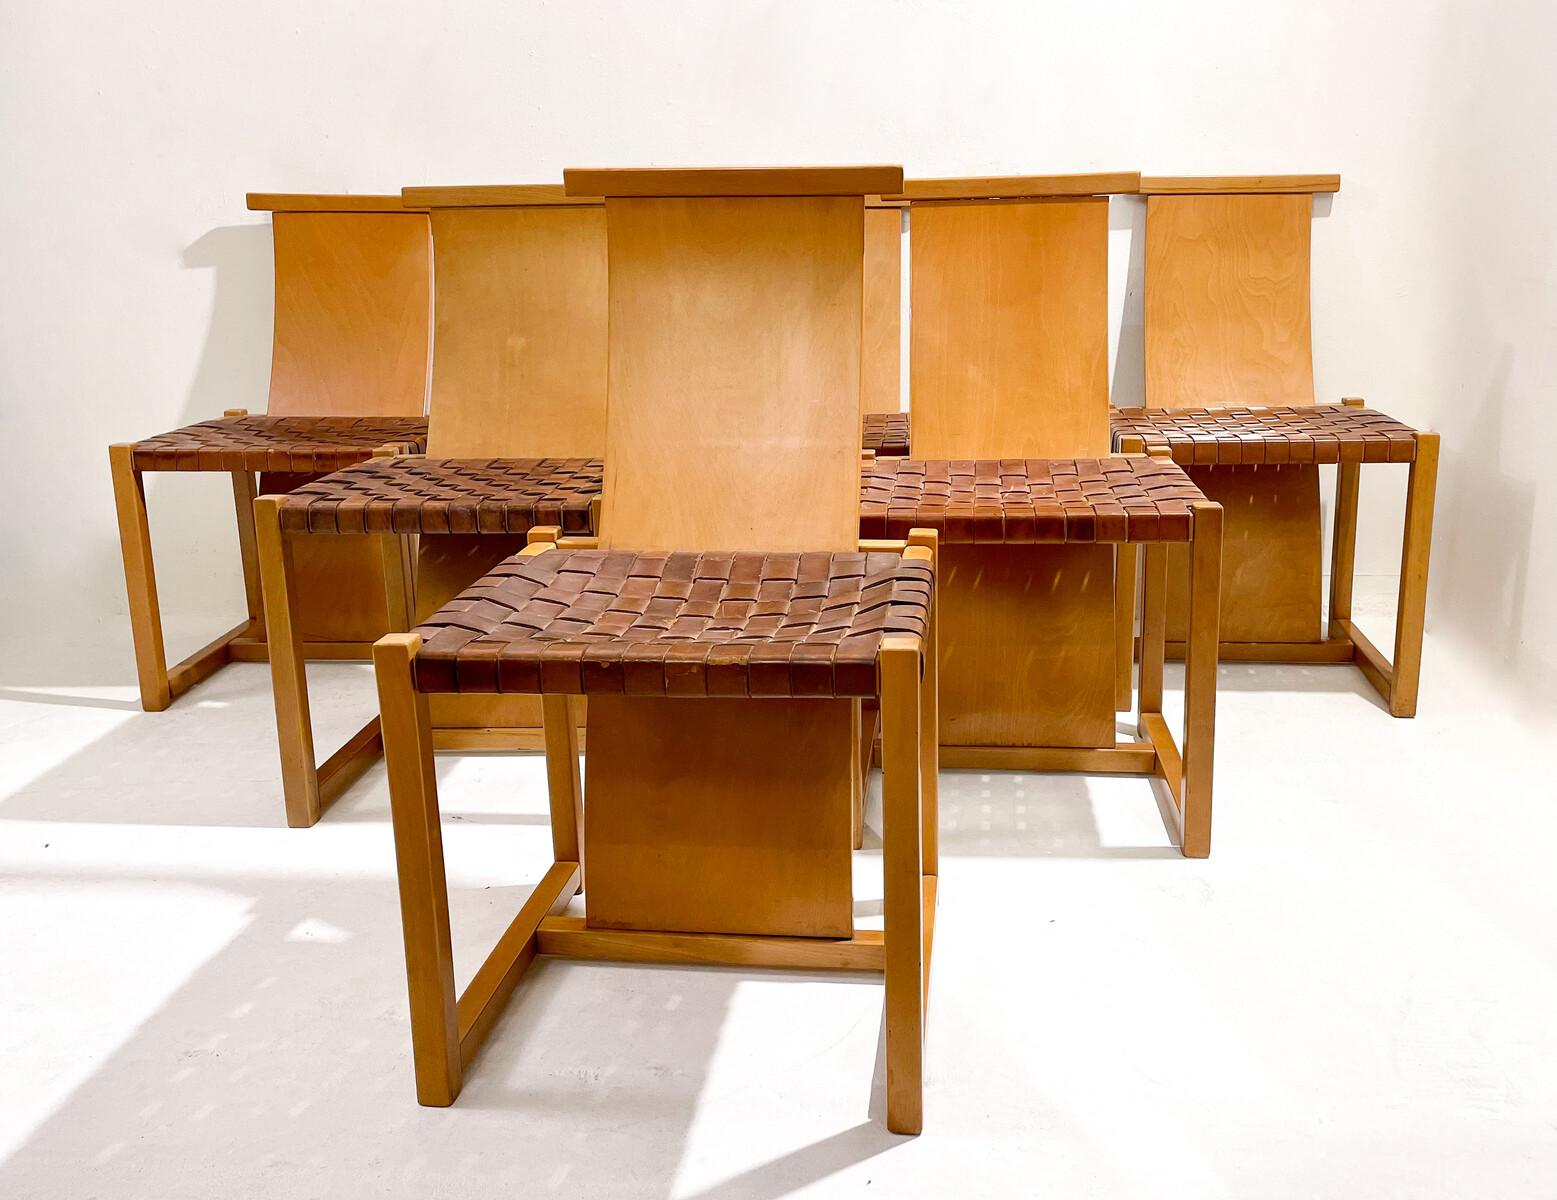 Italian Mid-Century Modern Set of 6 Wood and Leather Chairs, Italy, 1950s For Sale